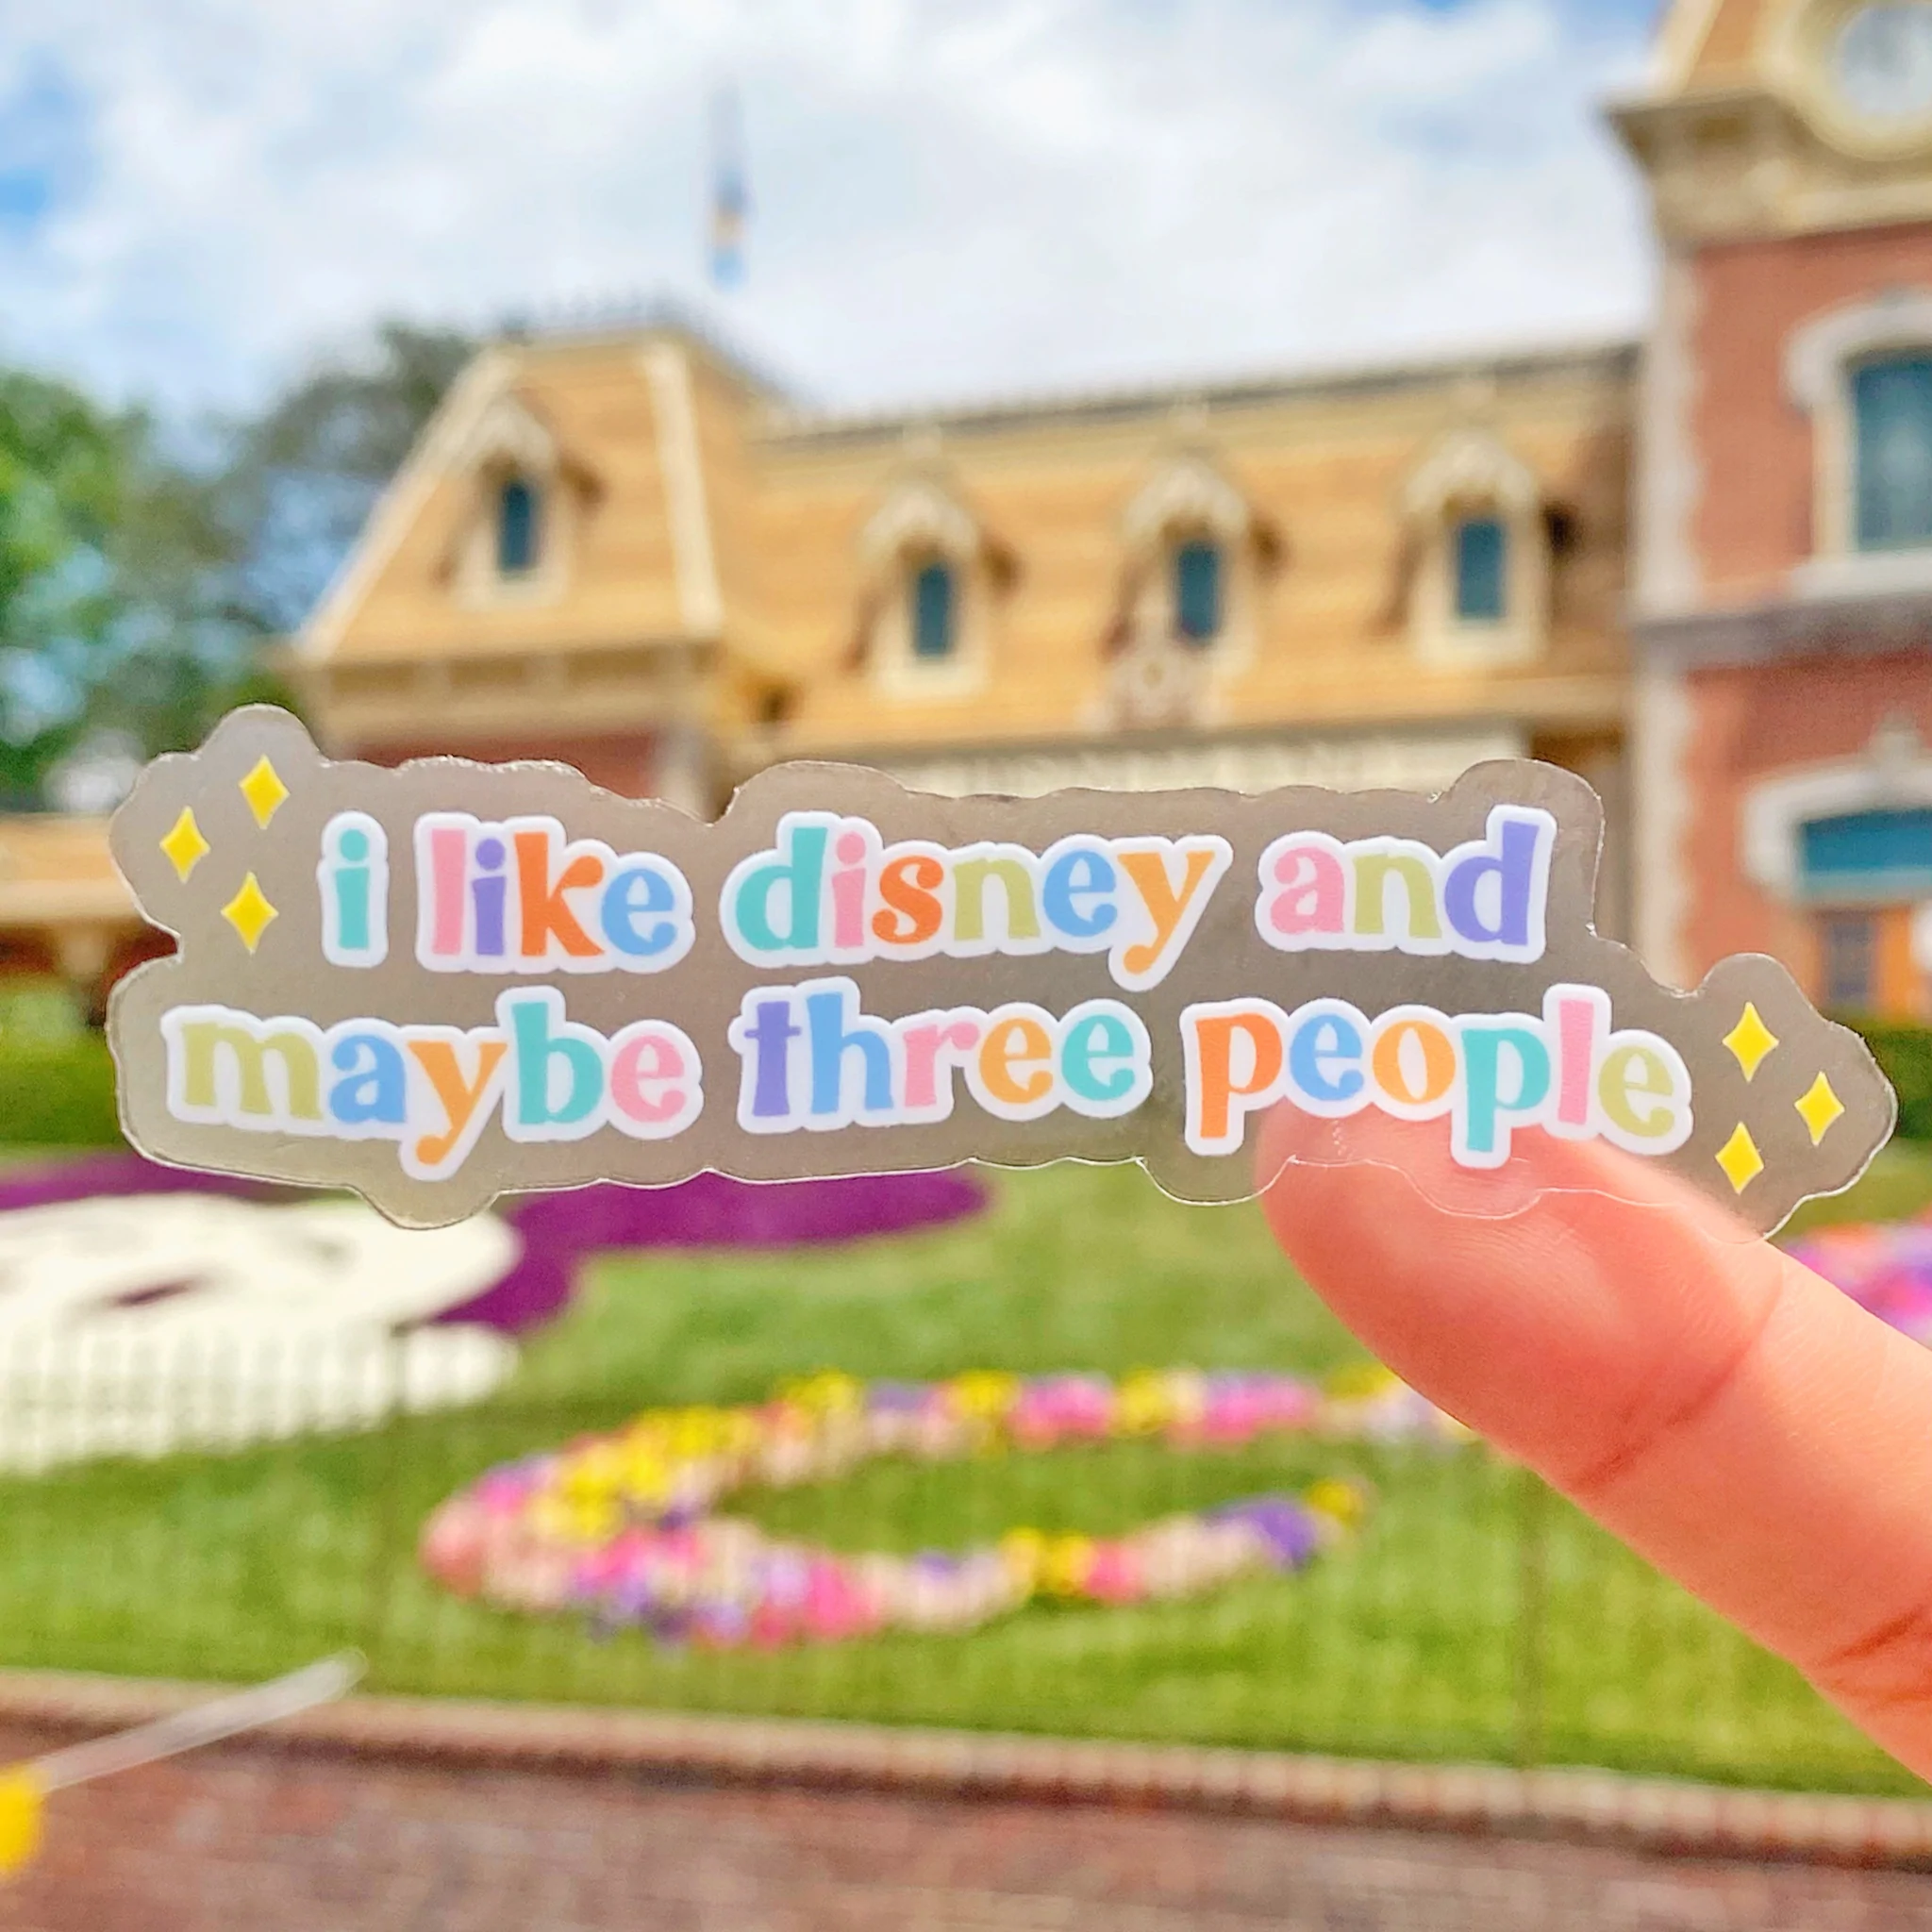 a colorful sticker that says &quot;i like disney and maybe three people&quot;